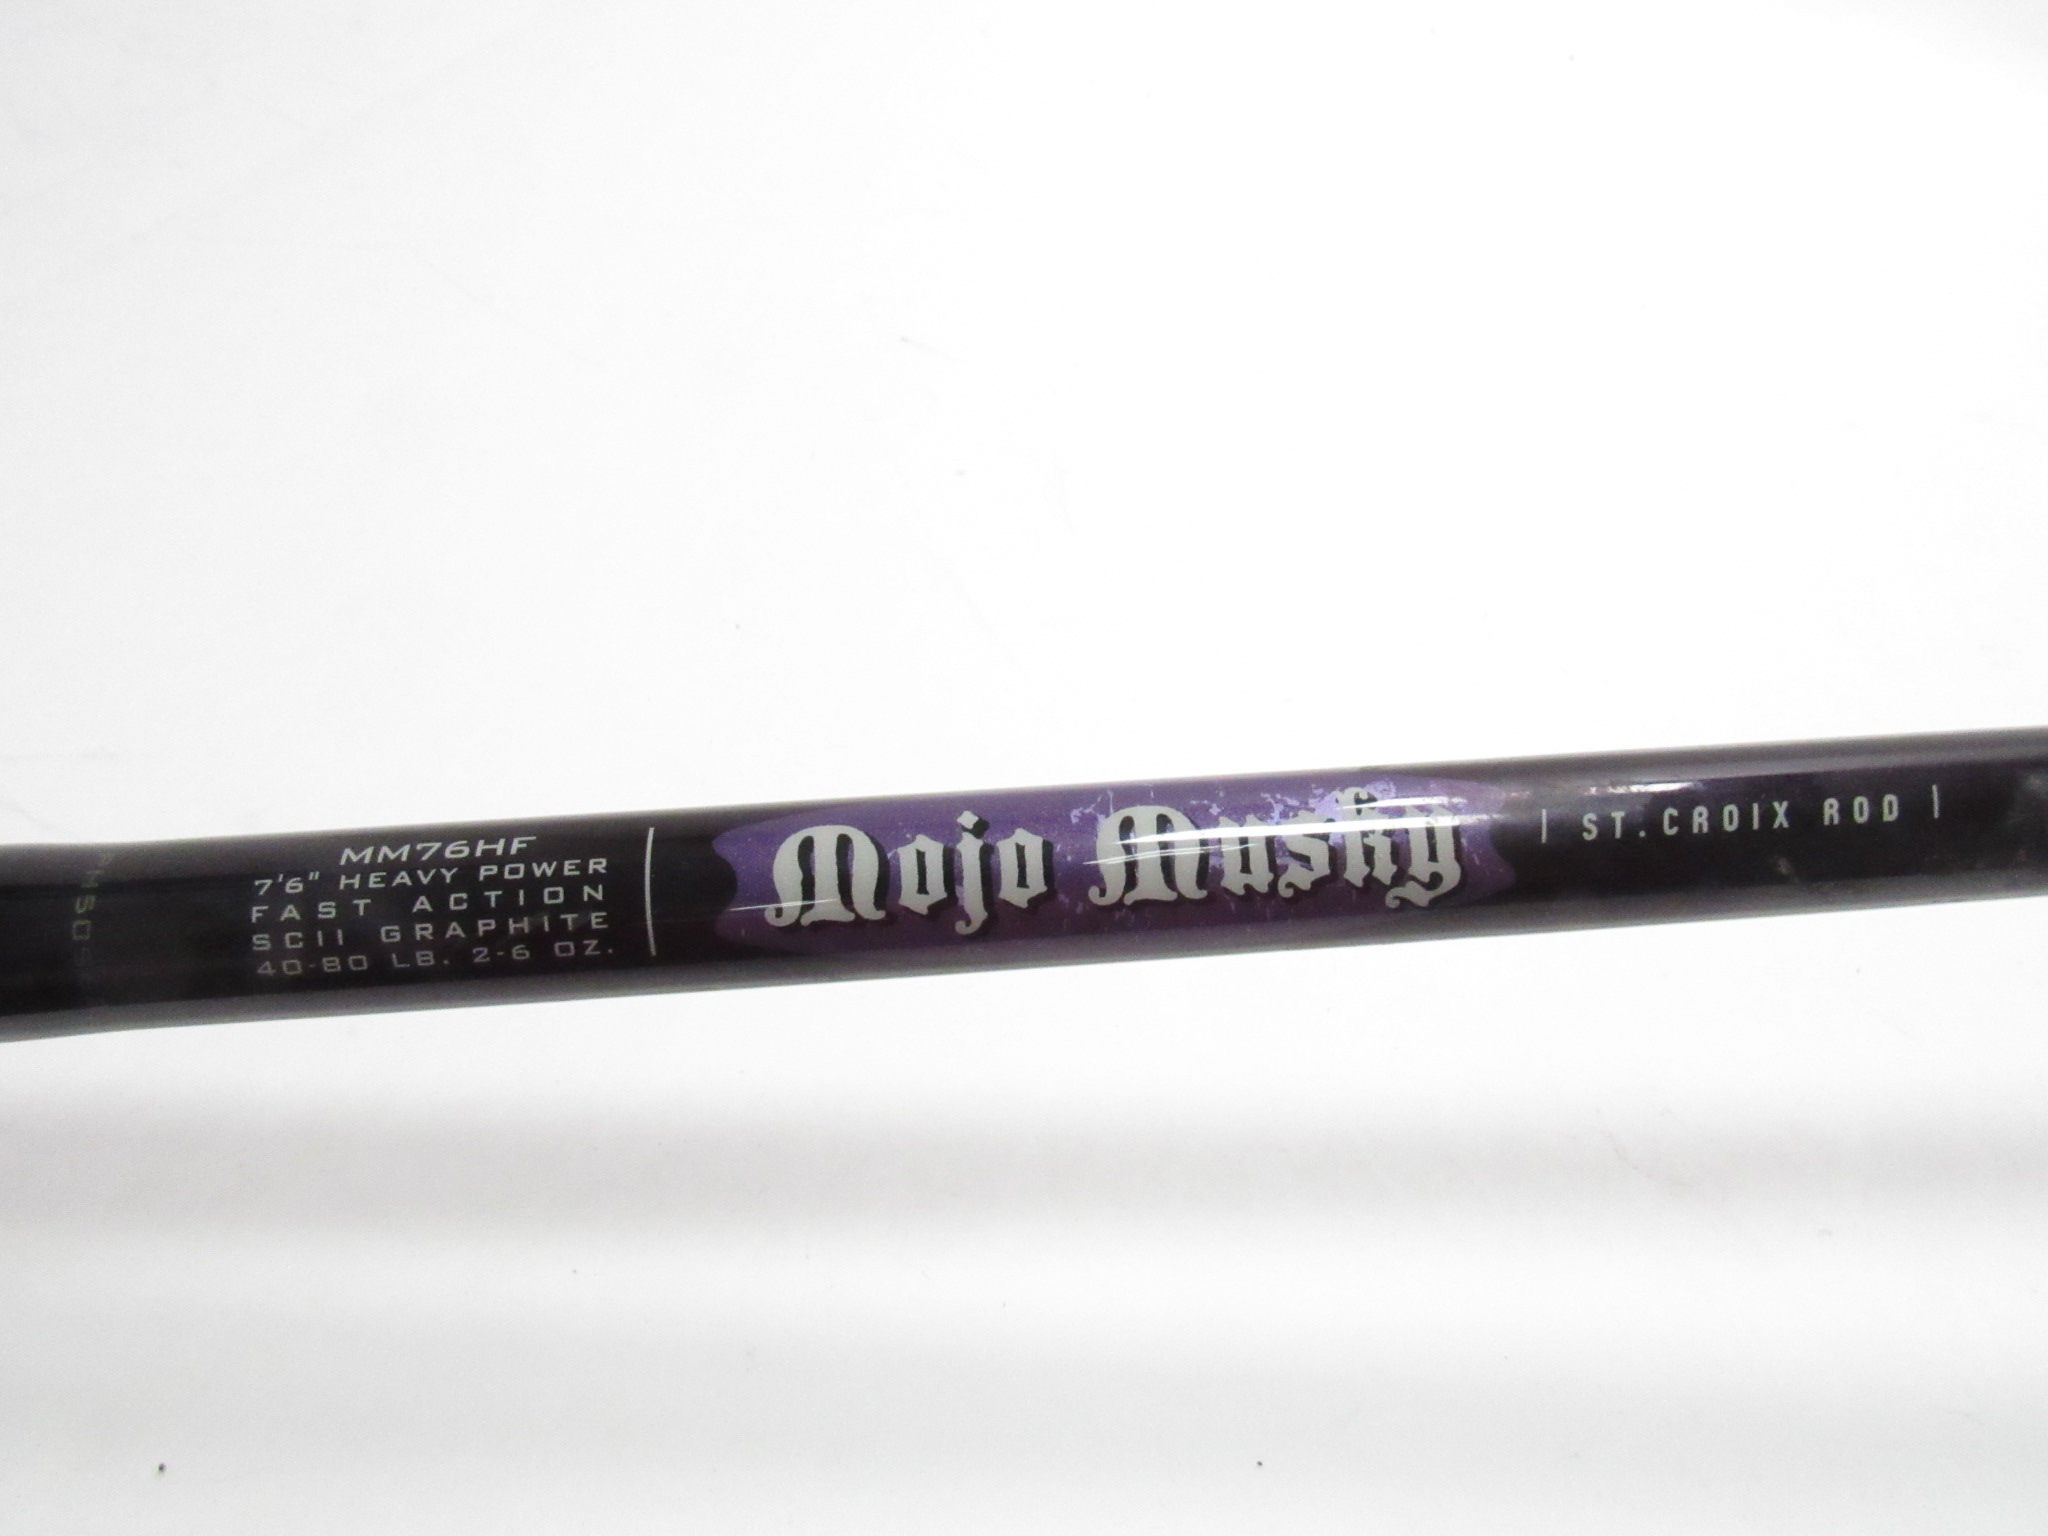 St. Croix Rods MM76HF Mojo Musky Casting Rod Local Pickup Only